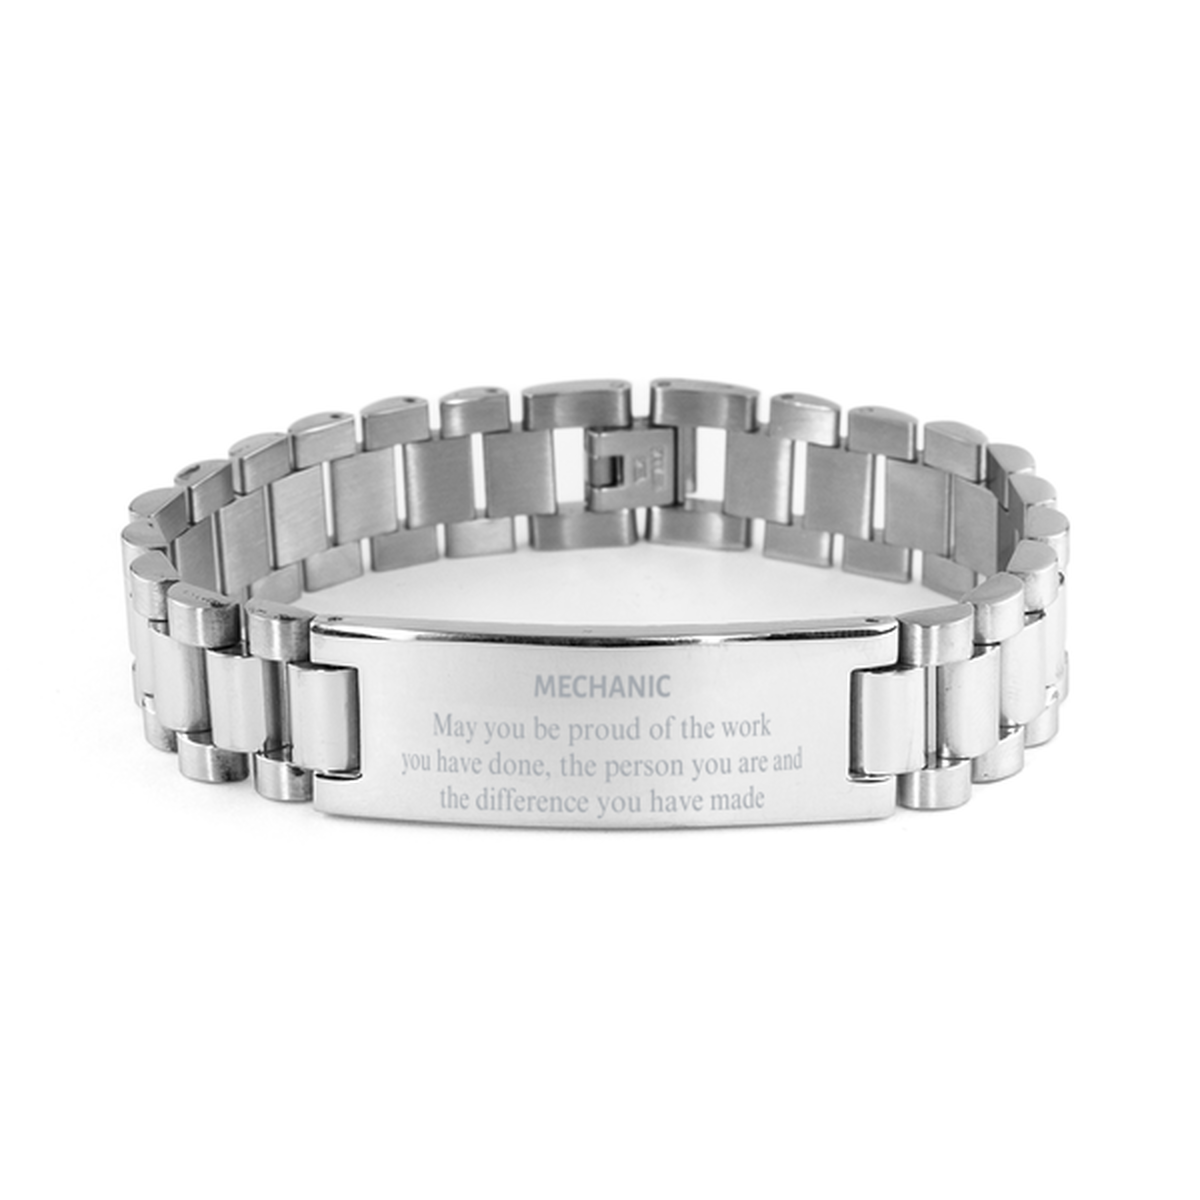 Mechanic May you be proud of the work you have done, Retirement Mechanic Ladder Stainless Steel Bracelet for Colleague Appreciation Gifts Amazing for Mechanic